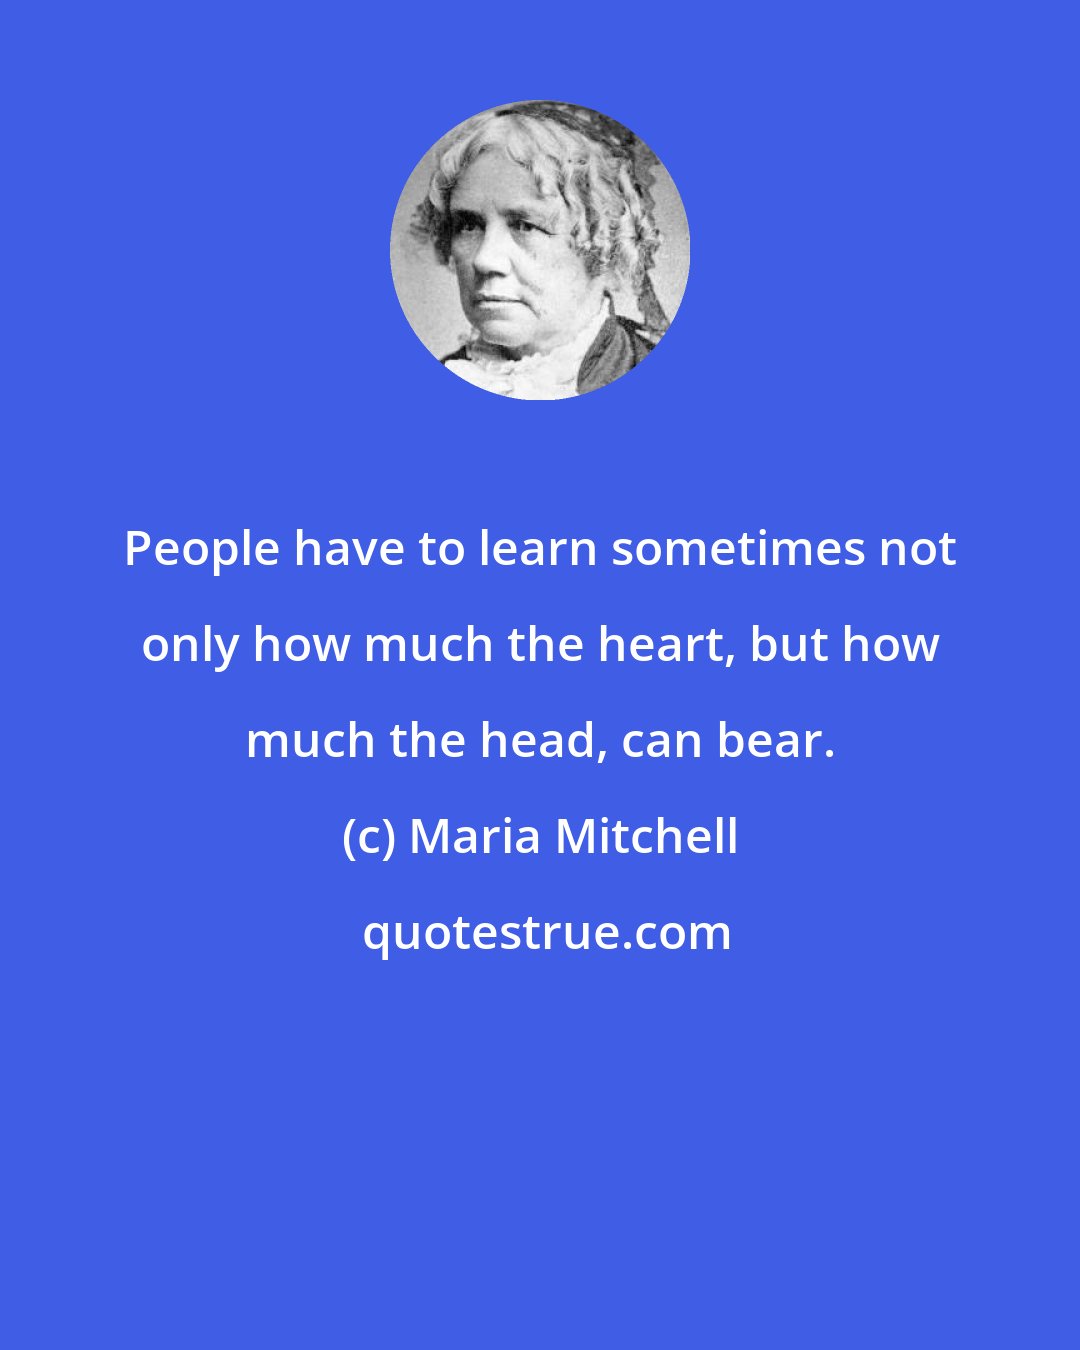 Maria Mitchell: People have to learn sometimes not only how much the heart, but how much the head, can bear.